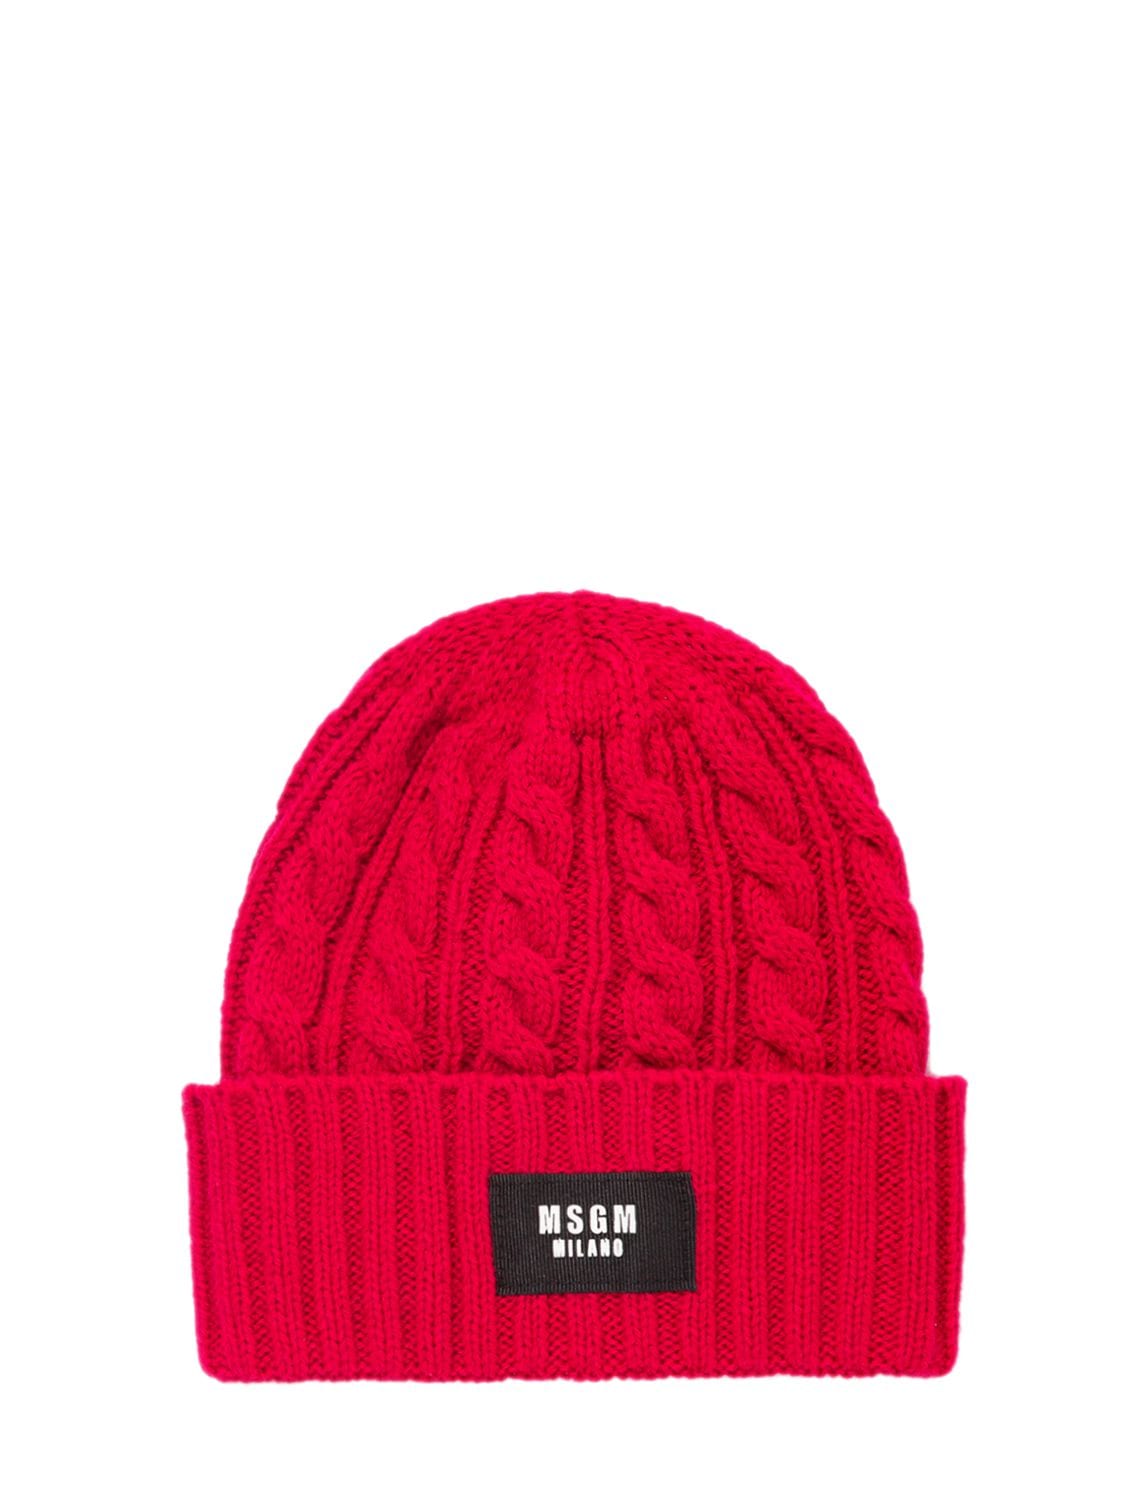 MSGM WOOL BLEND CABLE KNIT BEANIE